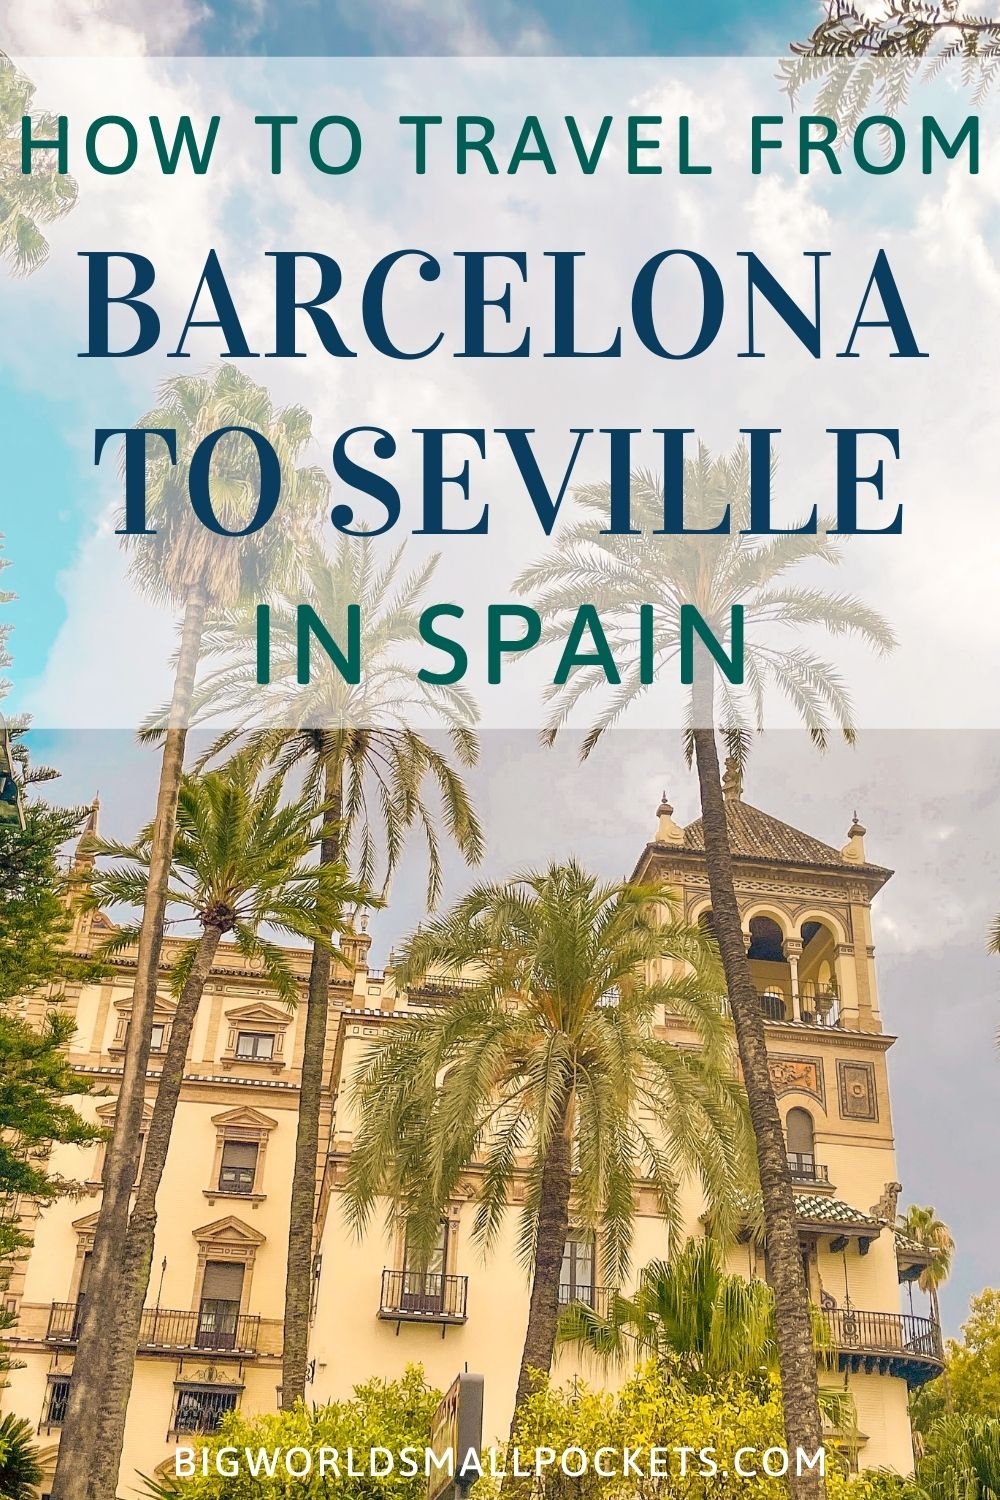 How to Travel from Barcelona to Seville